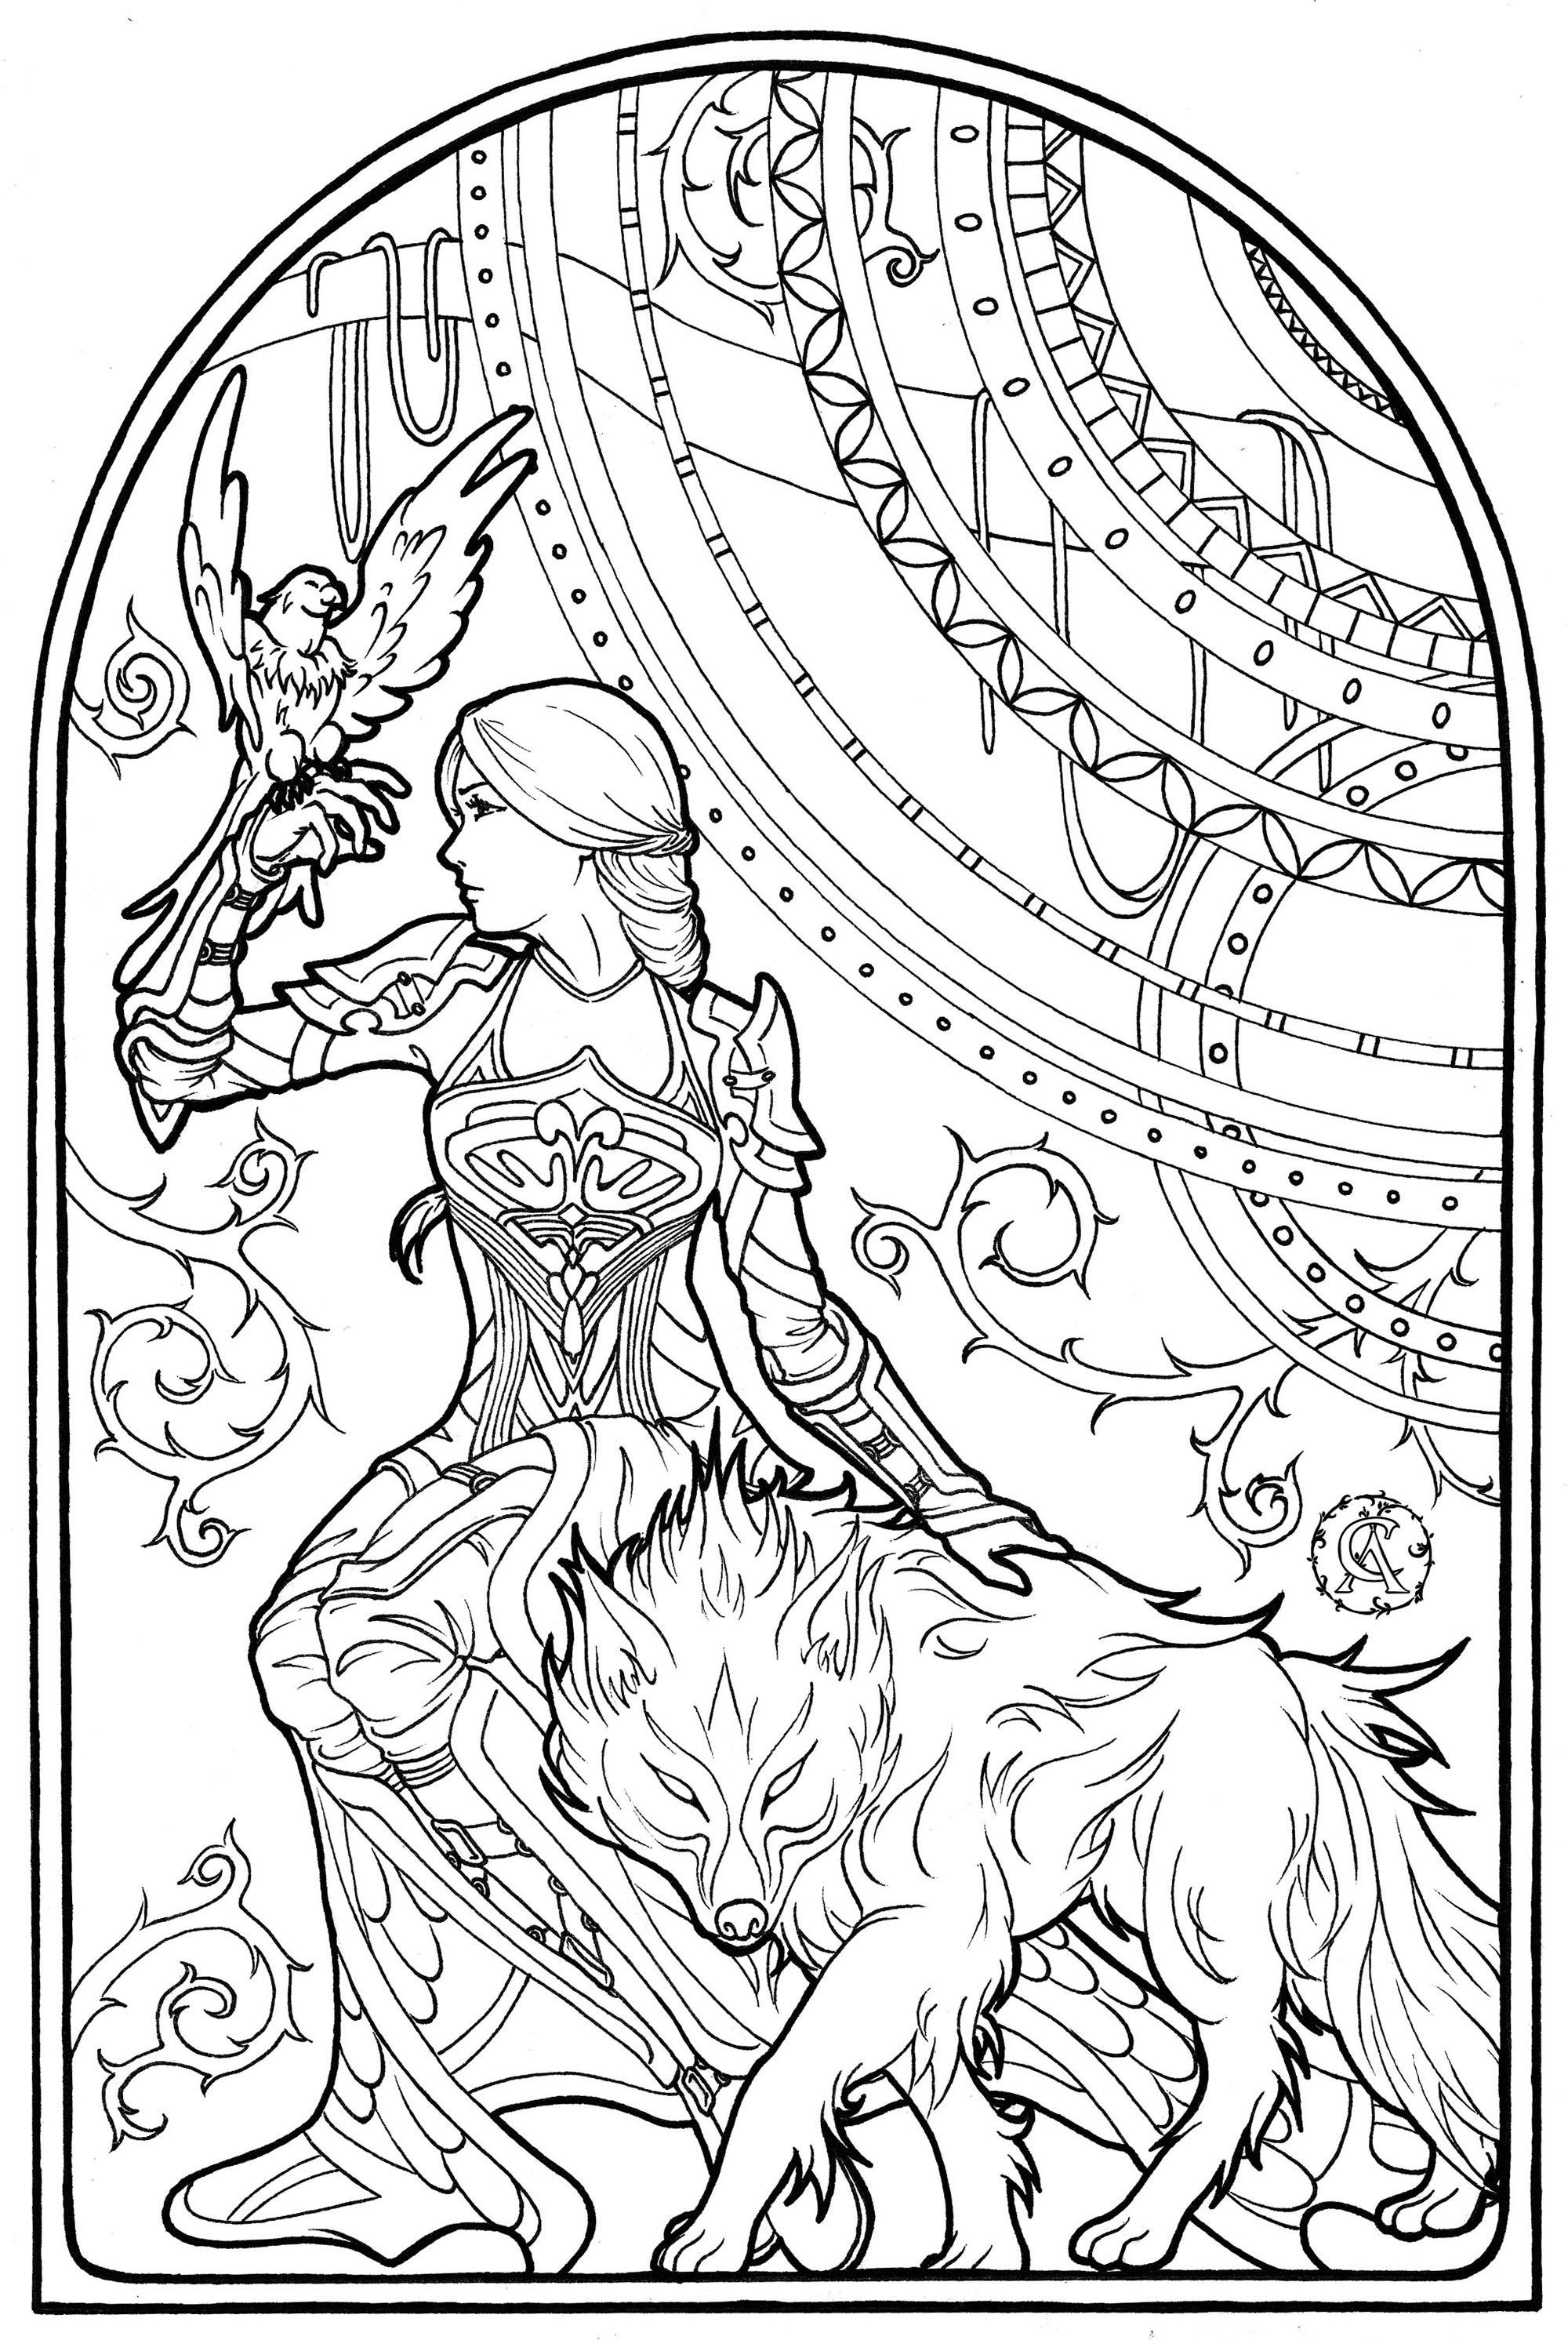 This intrepid woman is in the company of her hawk and her enchanted wolf. Drawn in Art Nouveau style, Artist : Asantassi